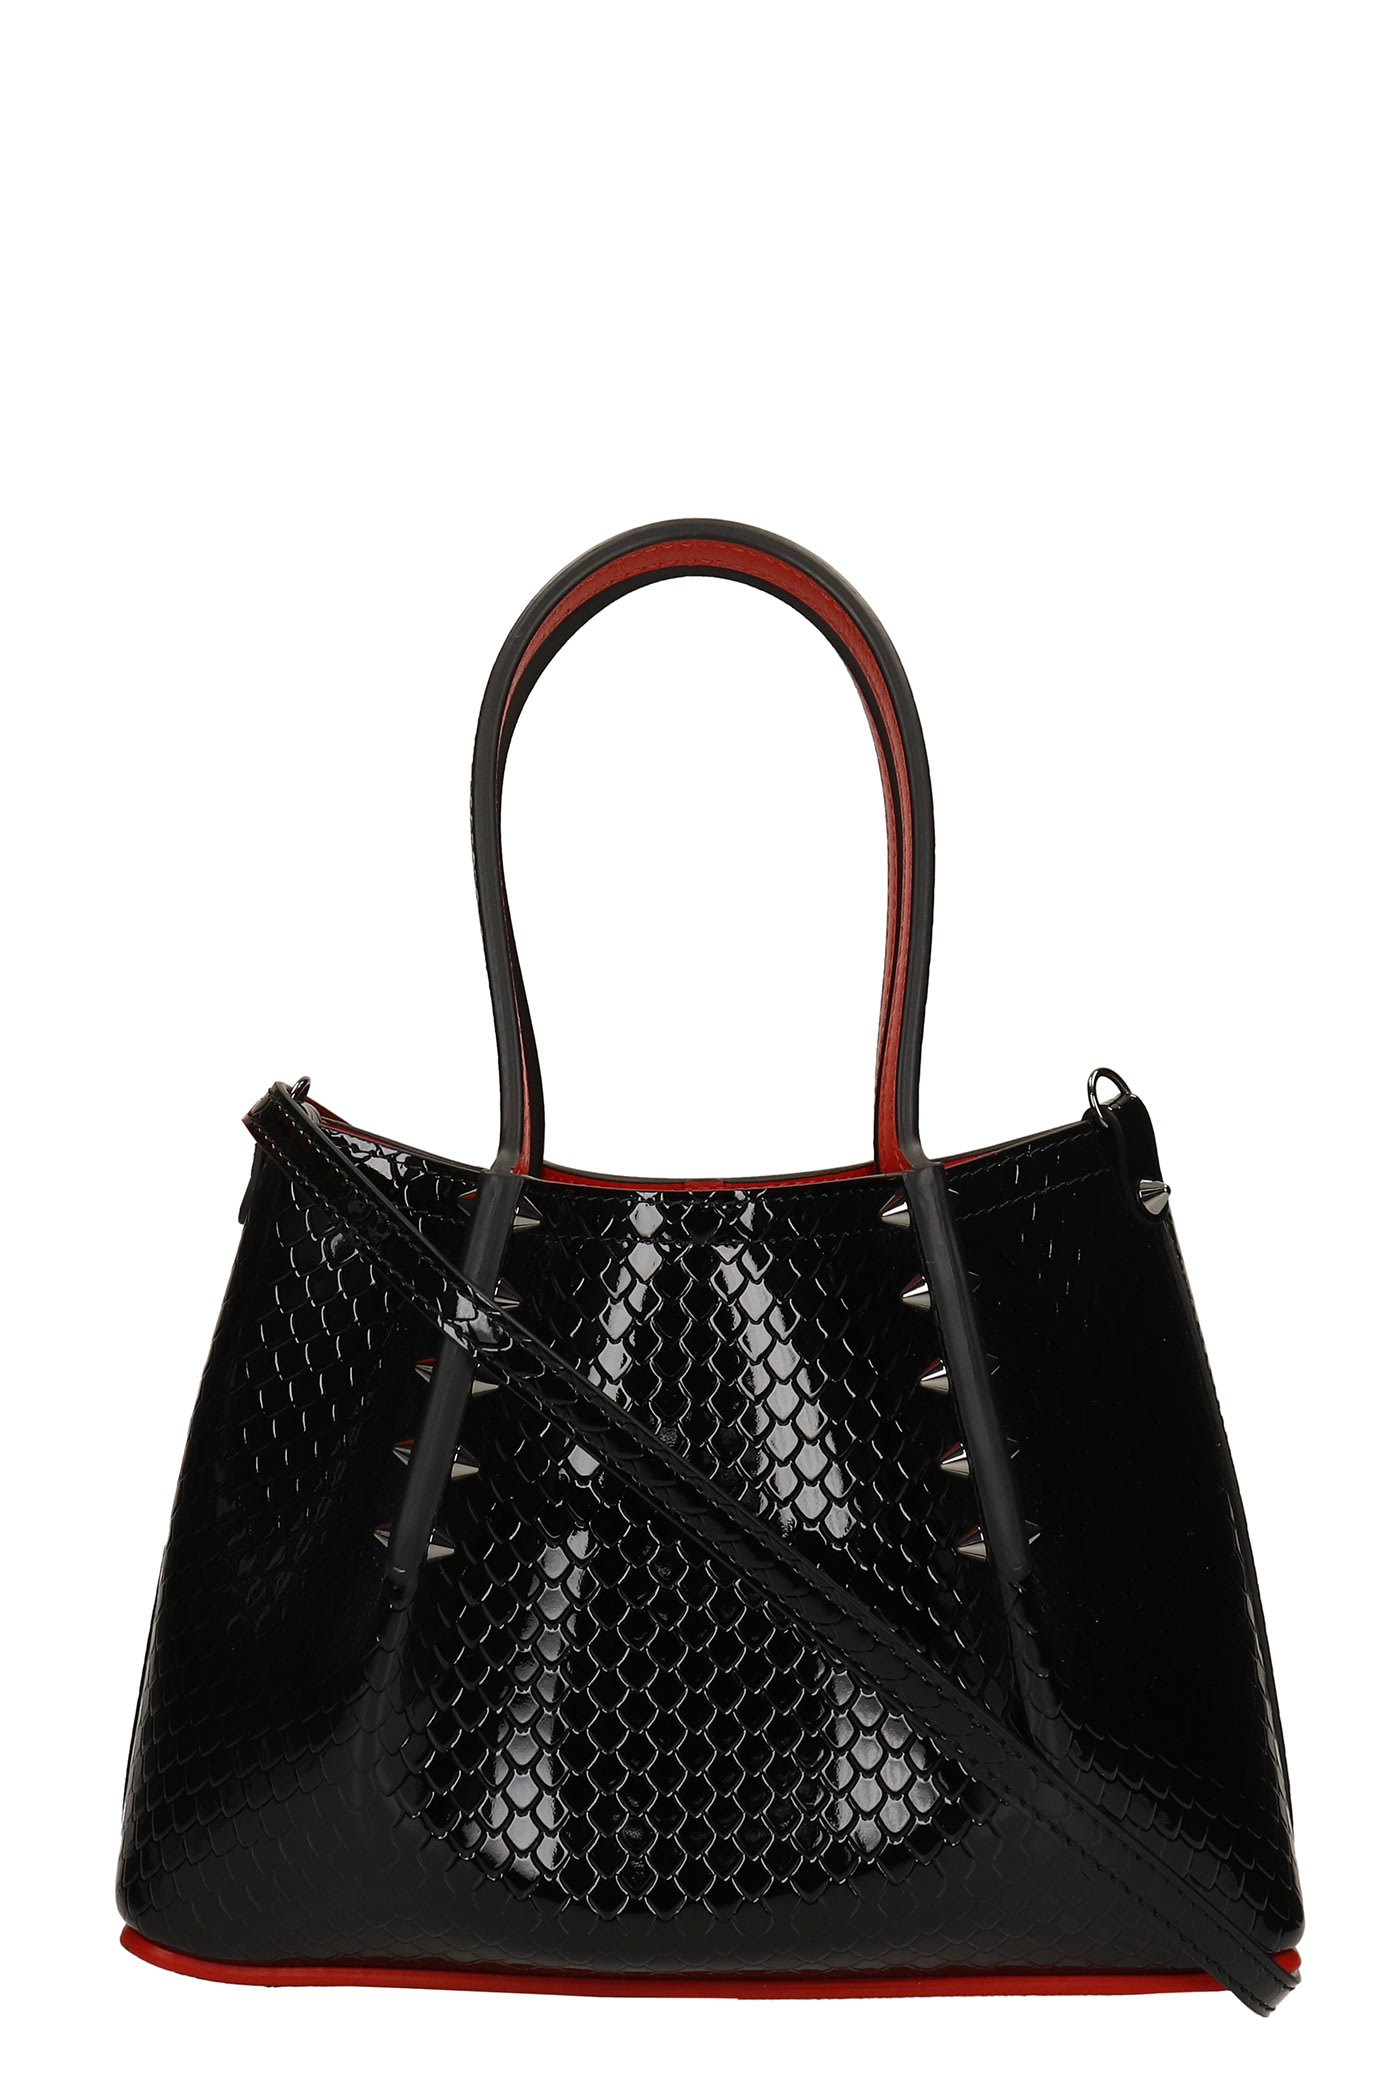 Christian Louboutin Cabata Tote In Black Patent Leather